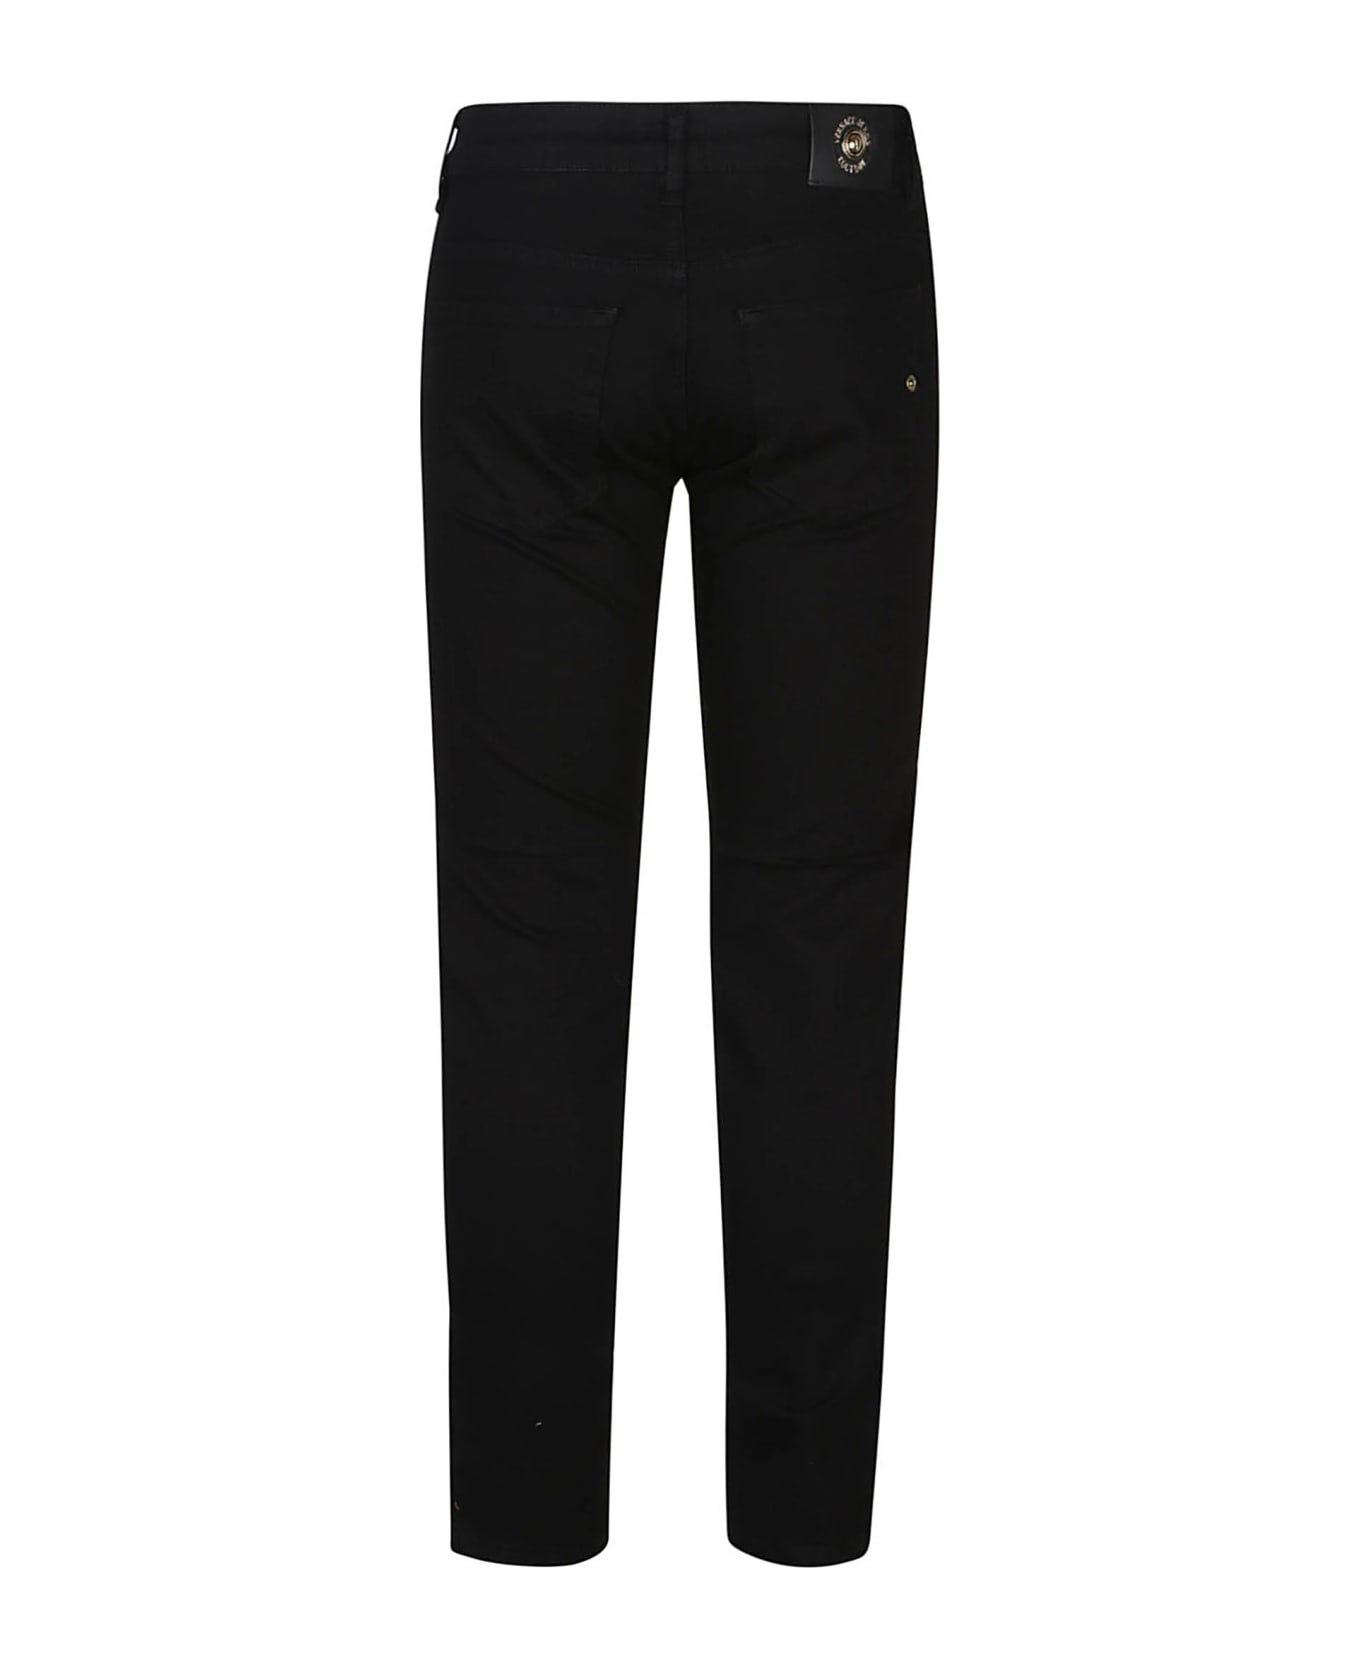 Versace Jeans Couture Narrow Dundee 5 Pockets Jeans - Black/black